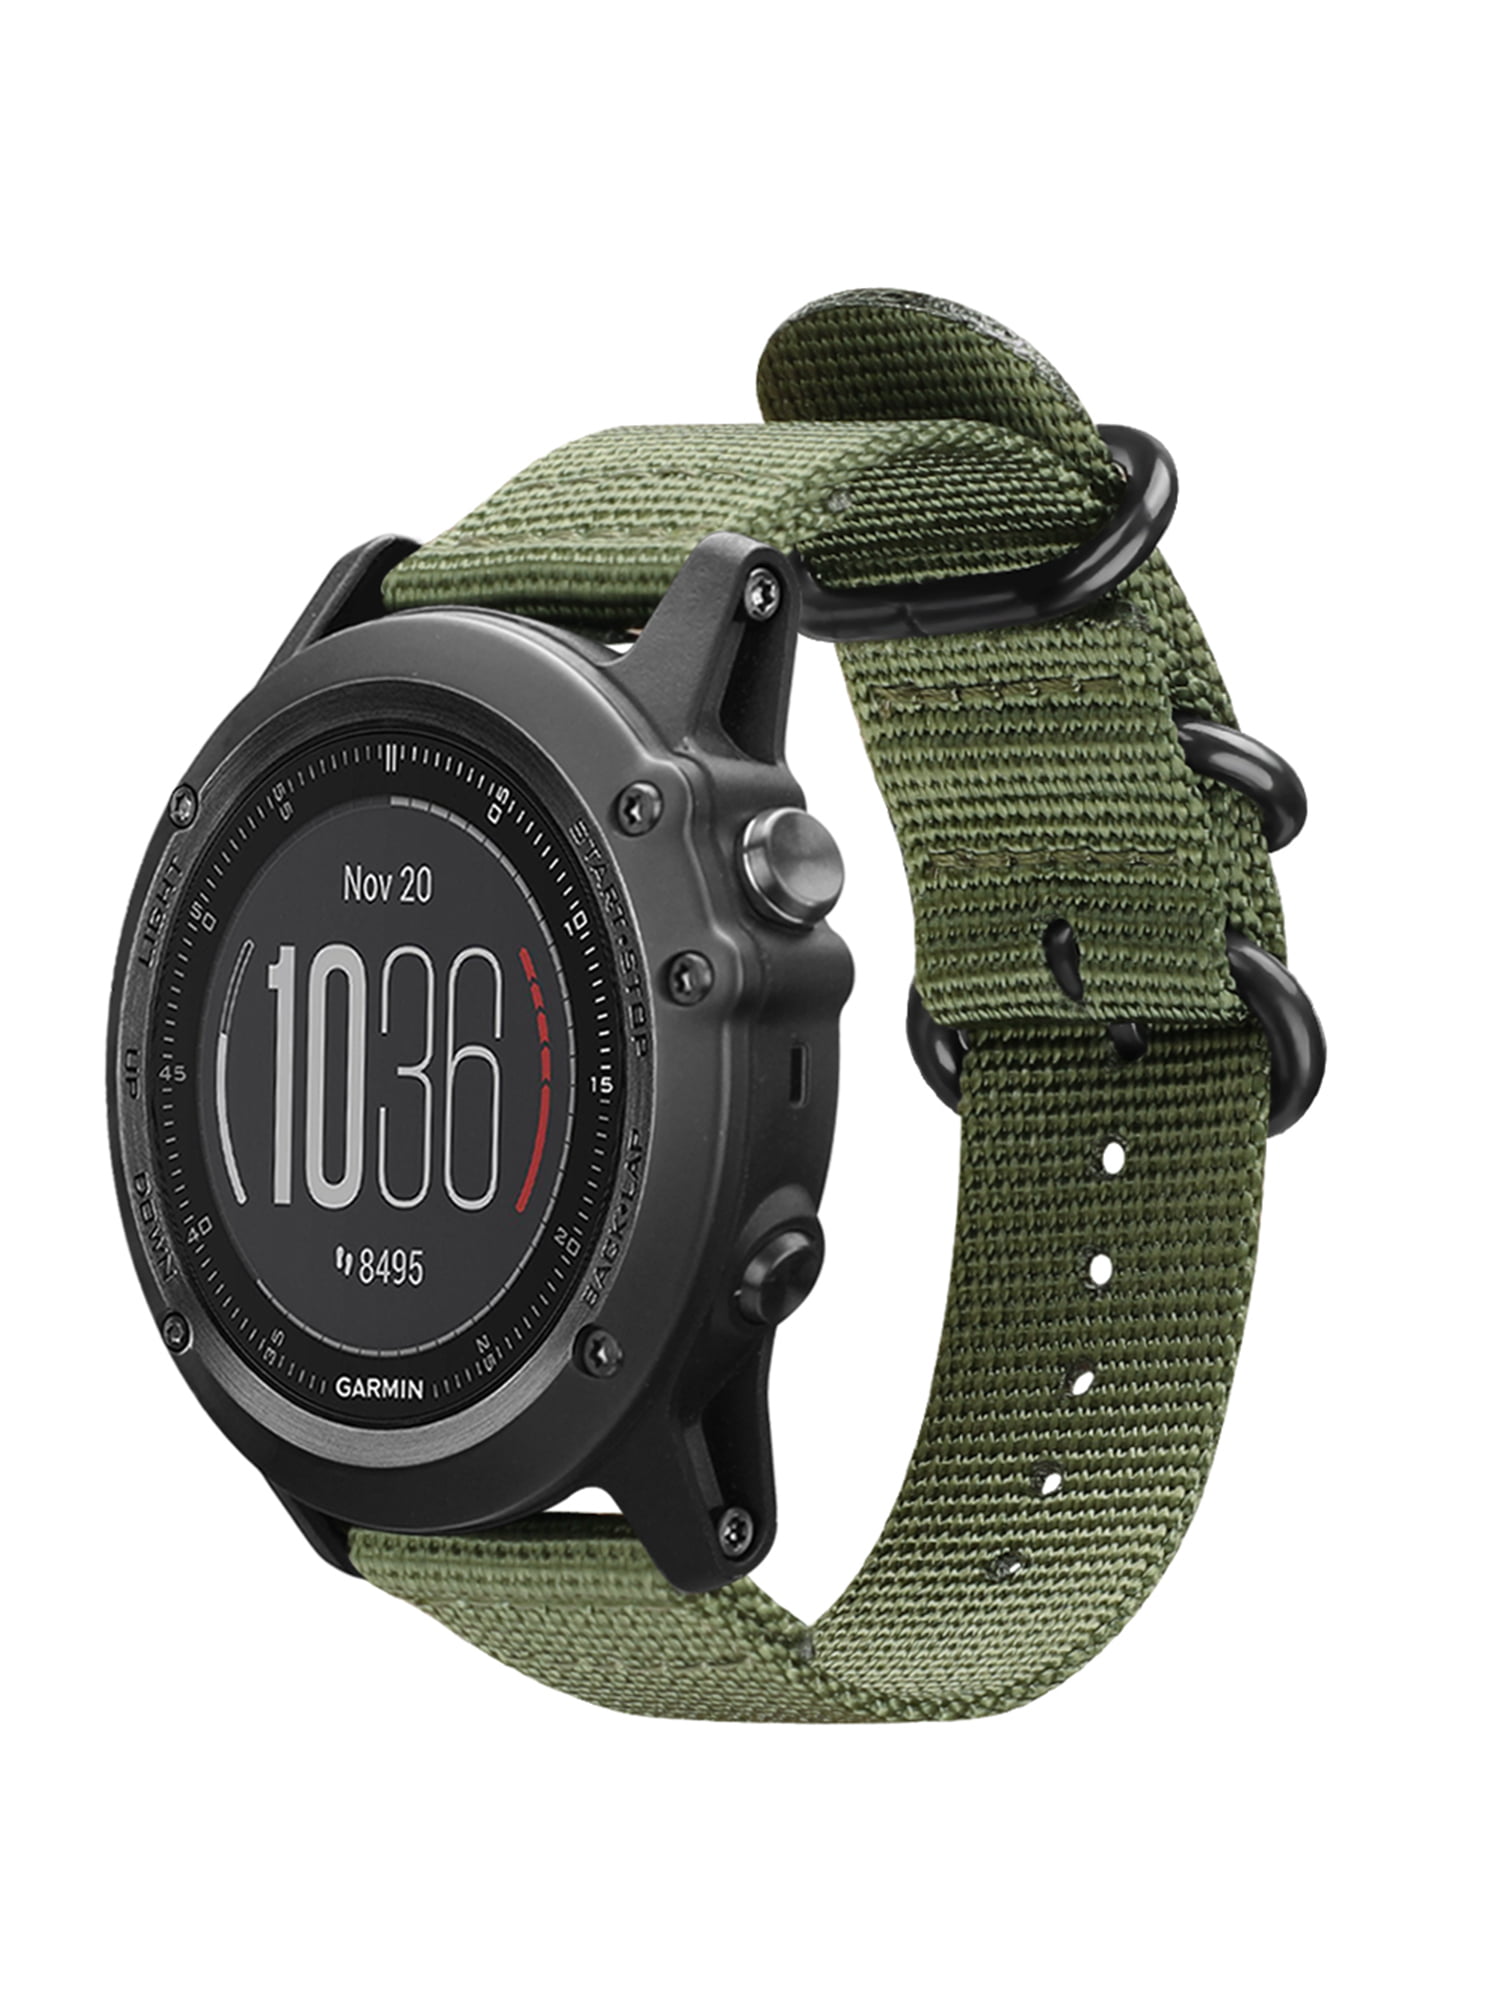  Customer reviews: Fintie Band Compatible with Garmin